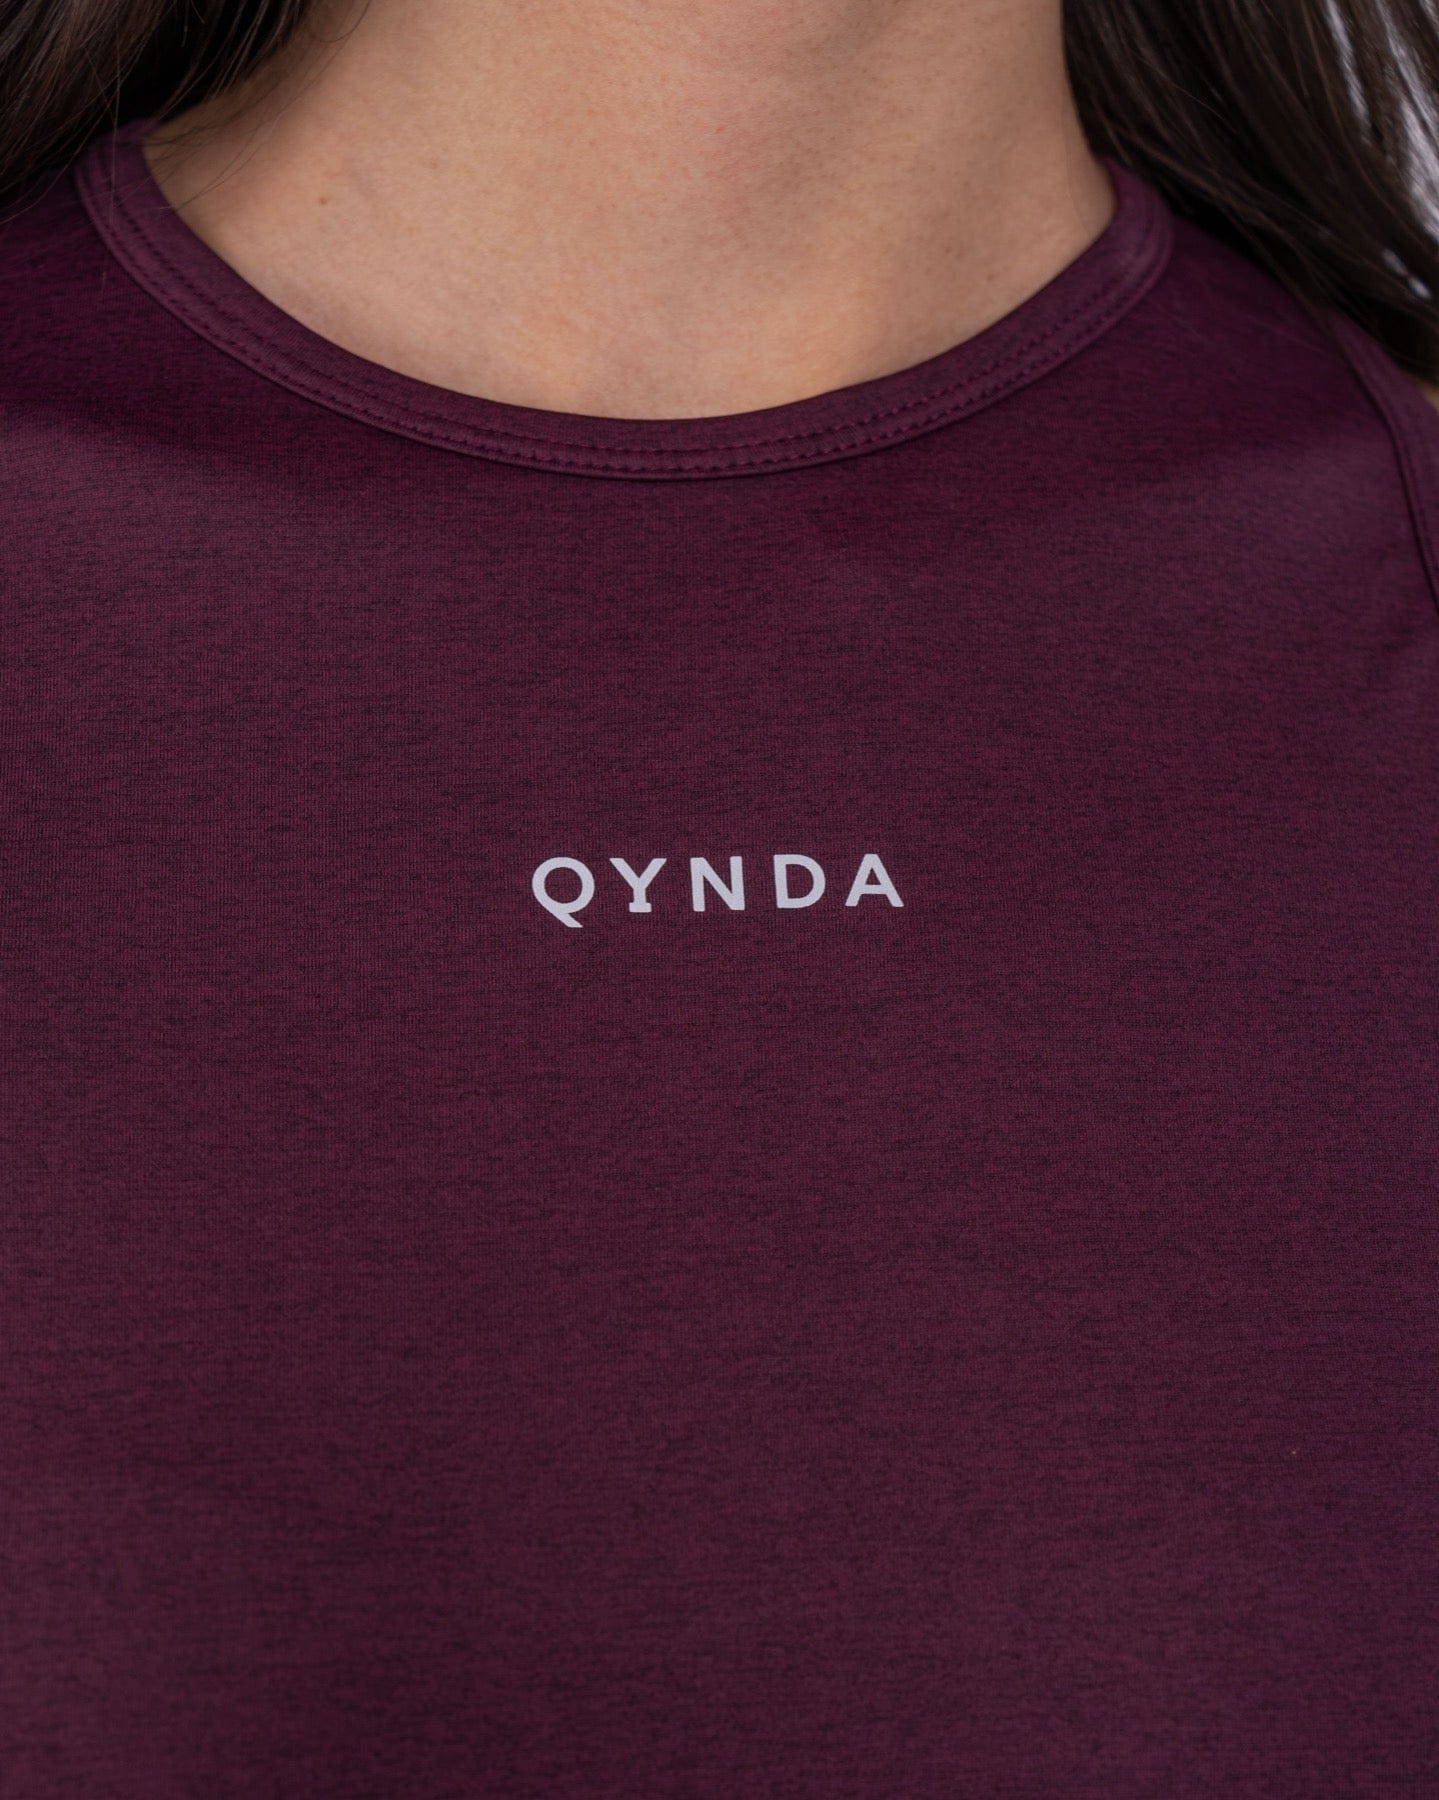 A woman with a modest athletic top made of brrr° material, with the brand "qynda" on it, looking.